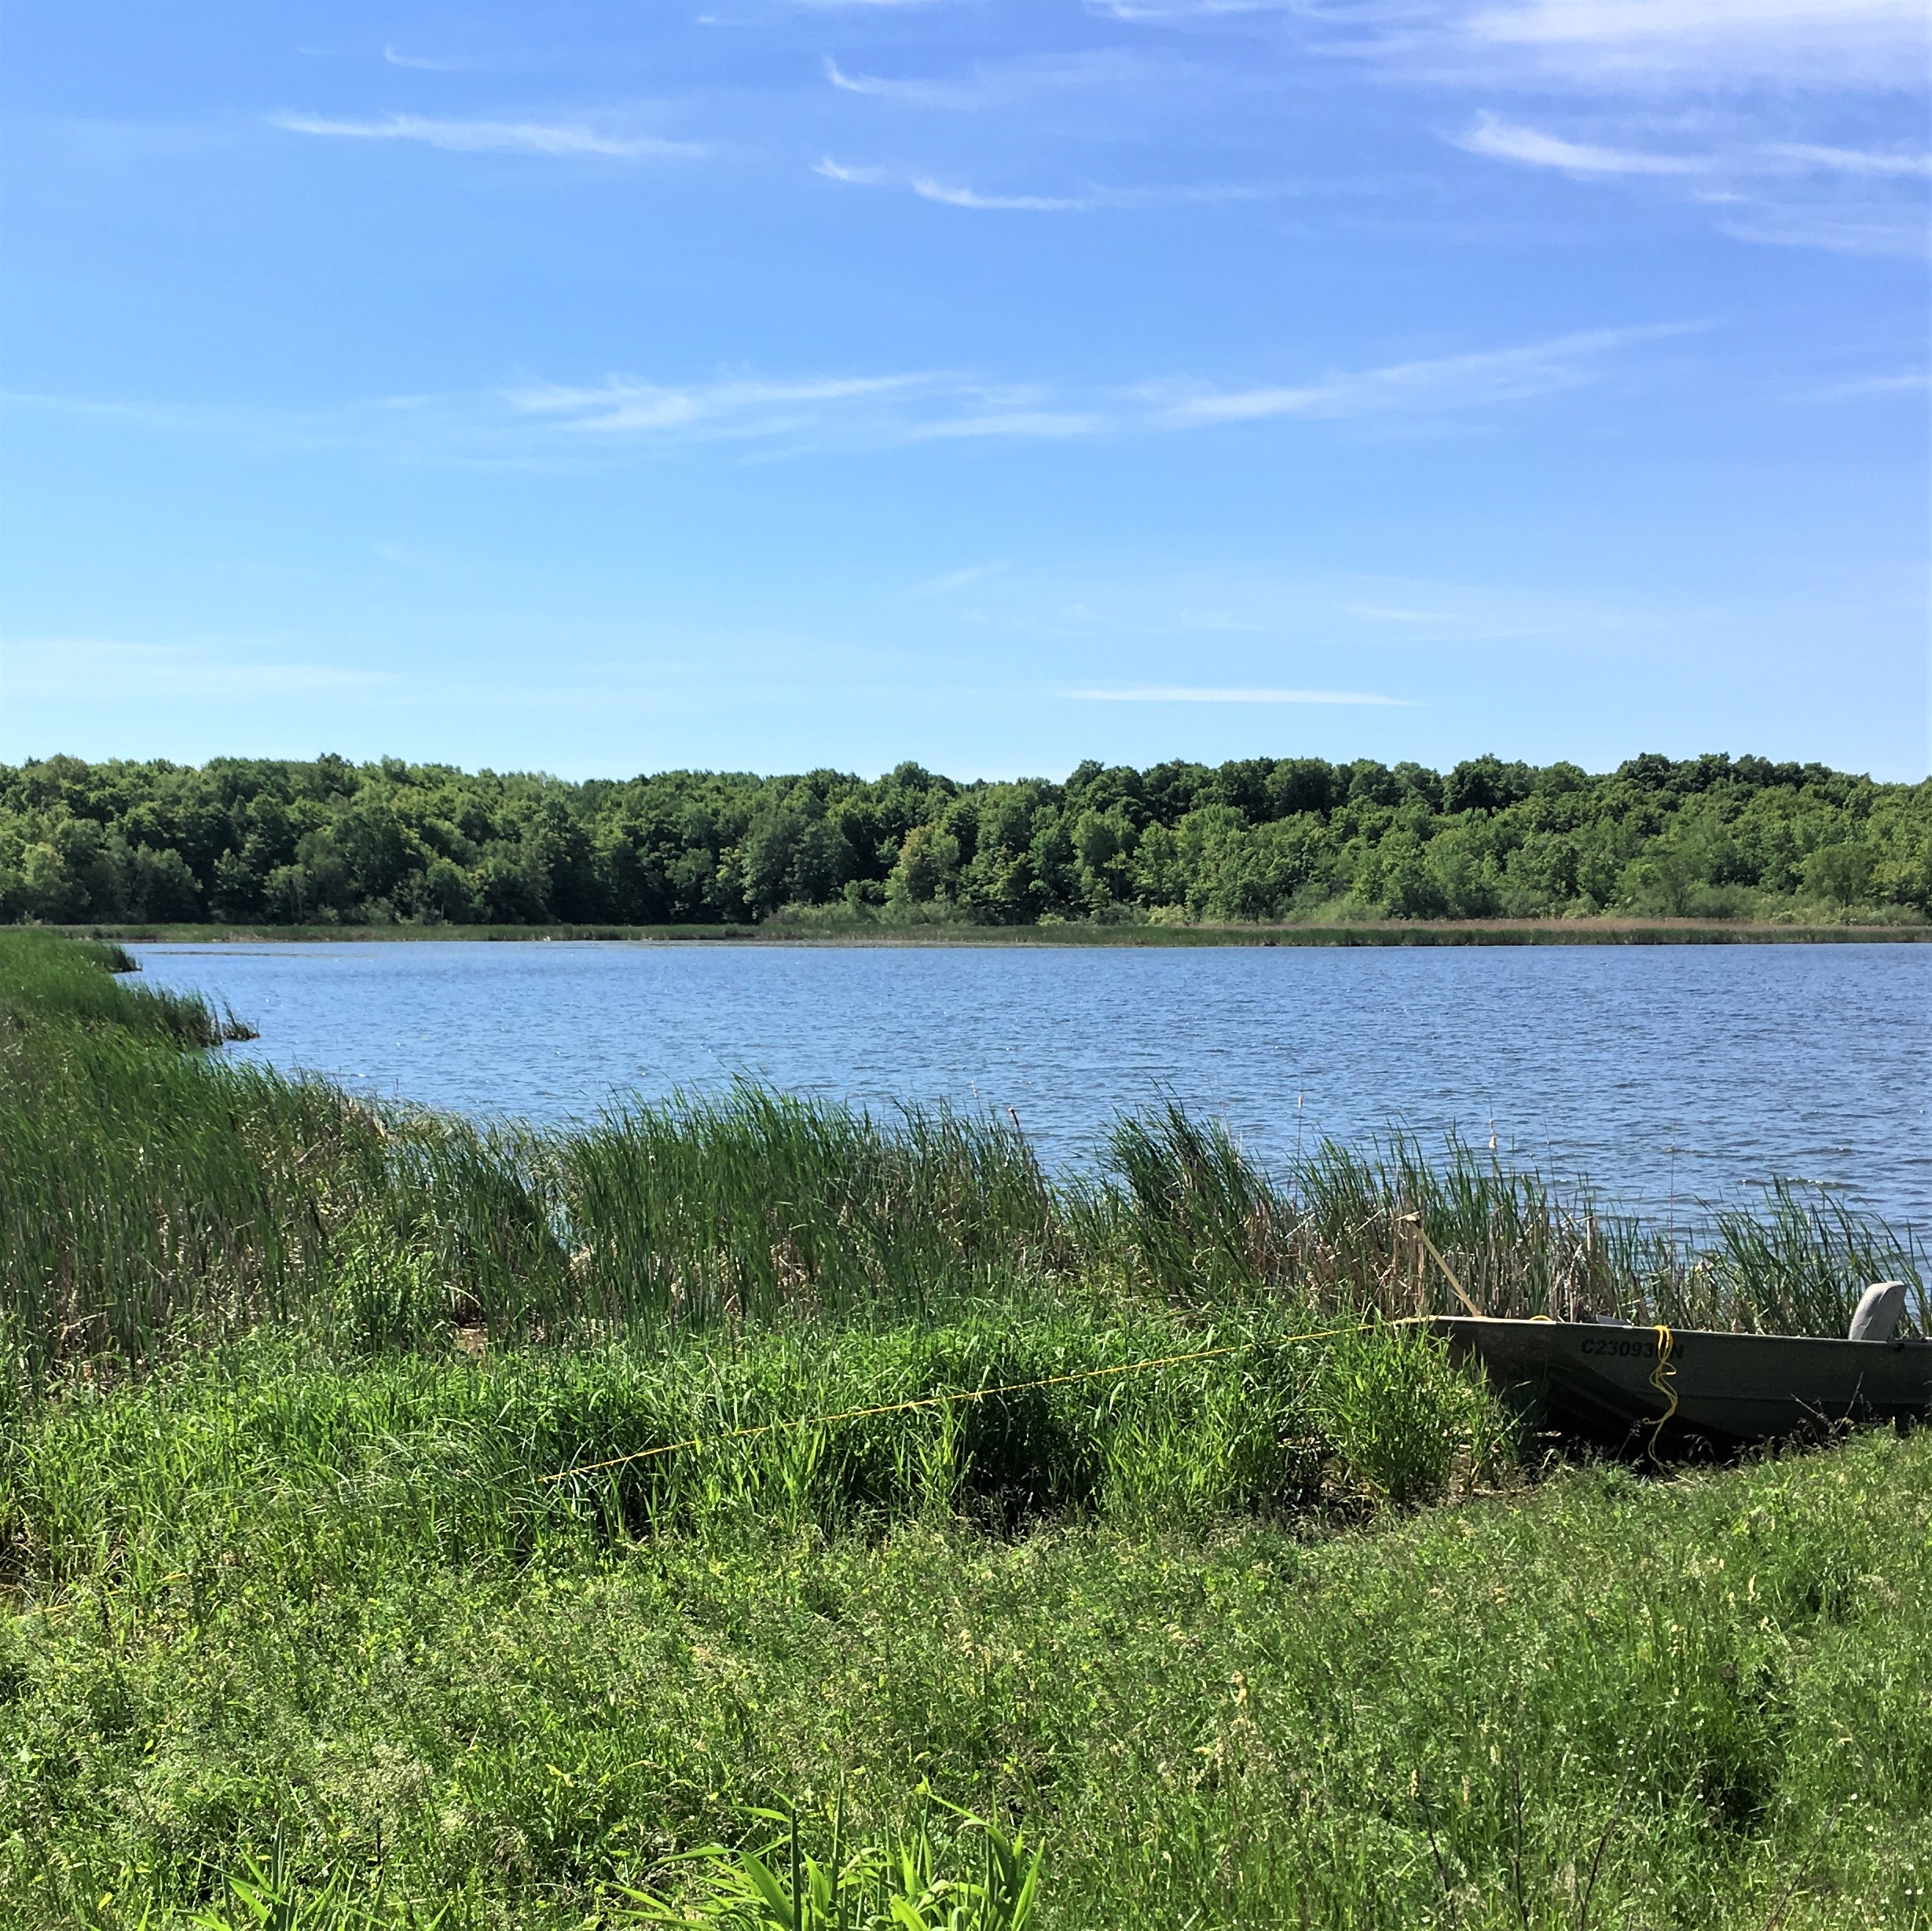 The Howe Island acquisition is one of 21 properties secured by DUC in southern Ontario, accounting for almost 7,000 acres (2,833 hectares) of habitat in the drainage area for the Great Lakes watershed.